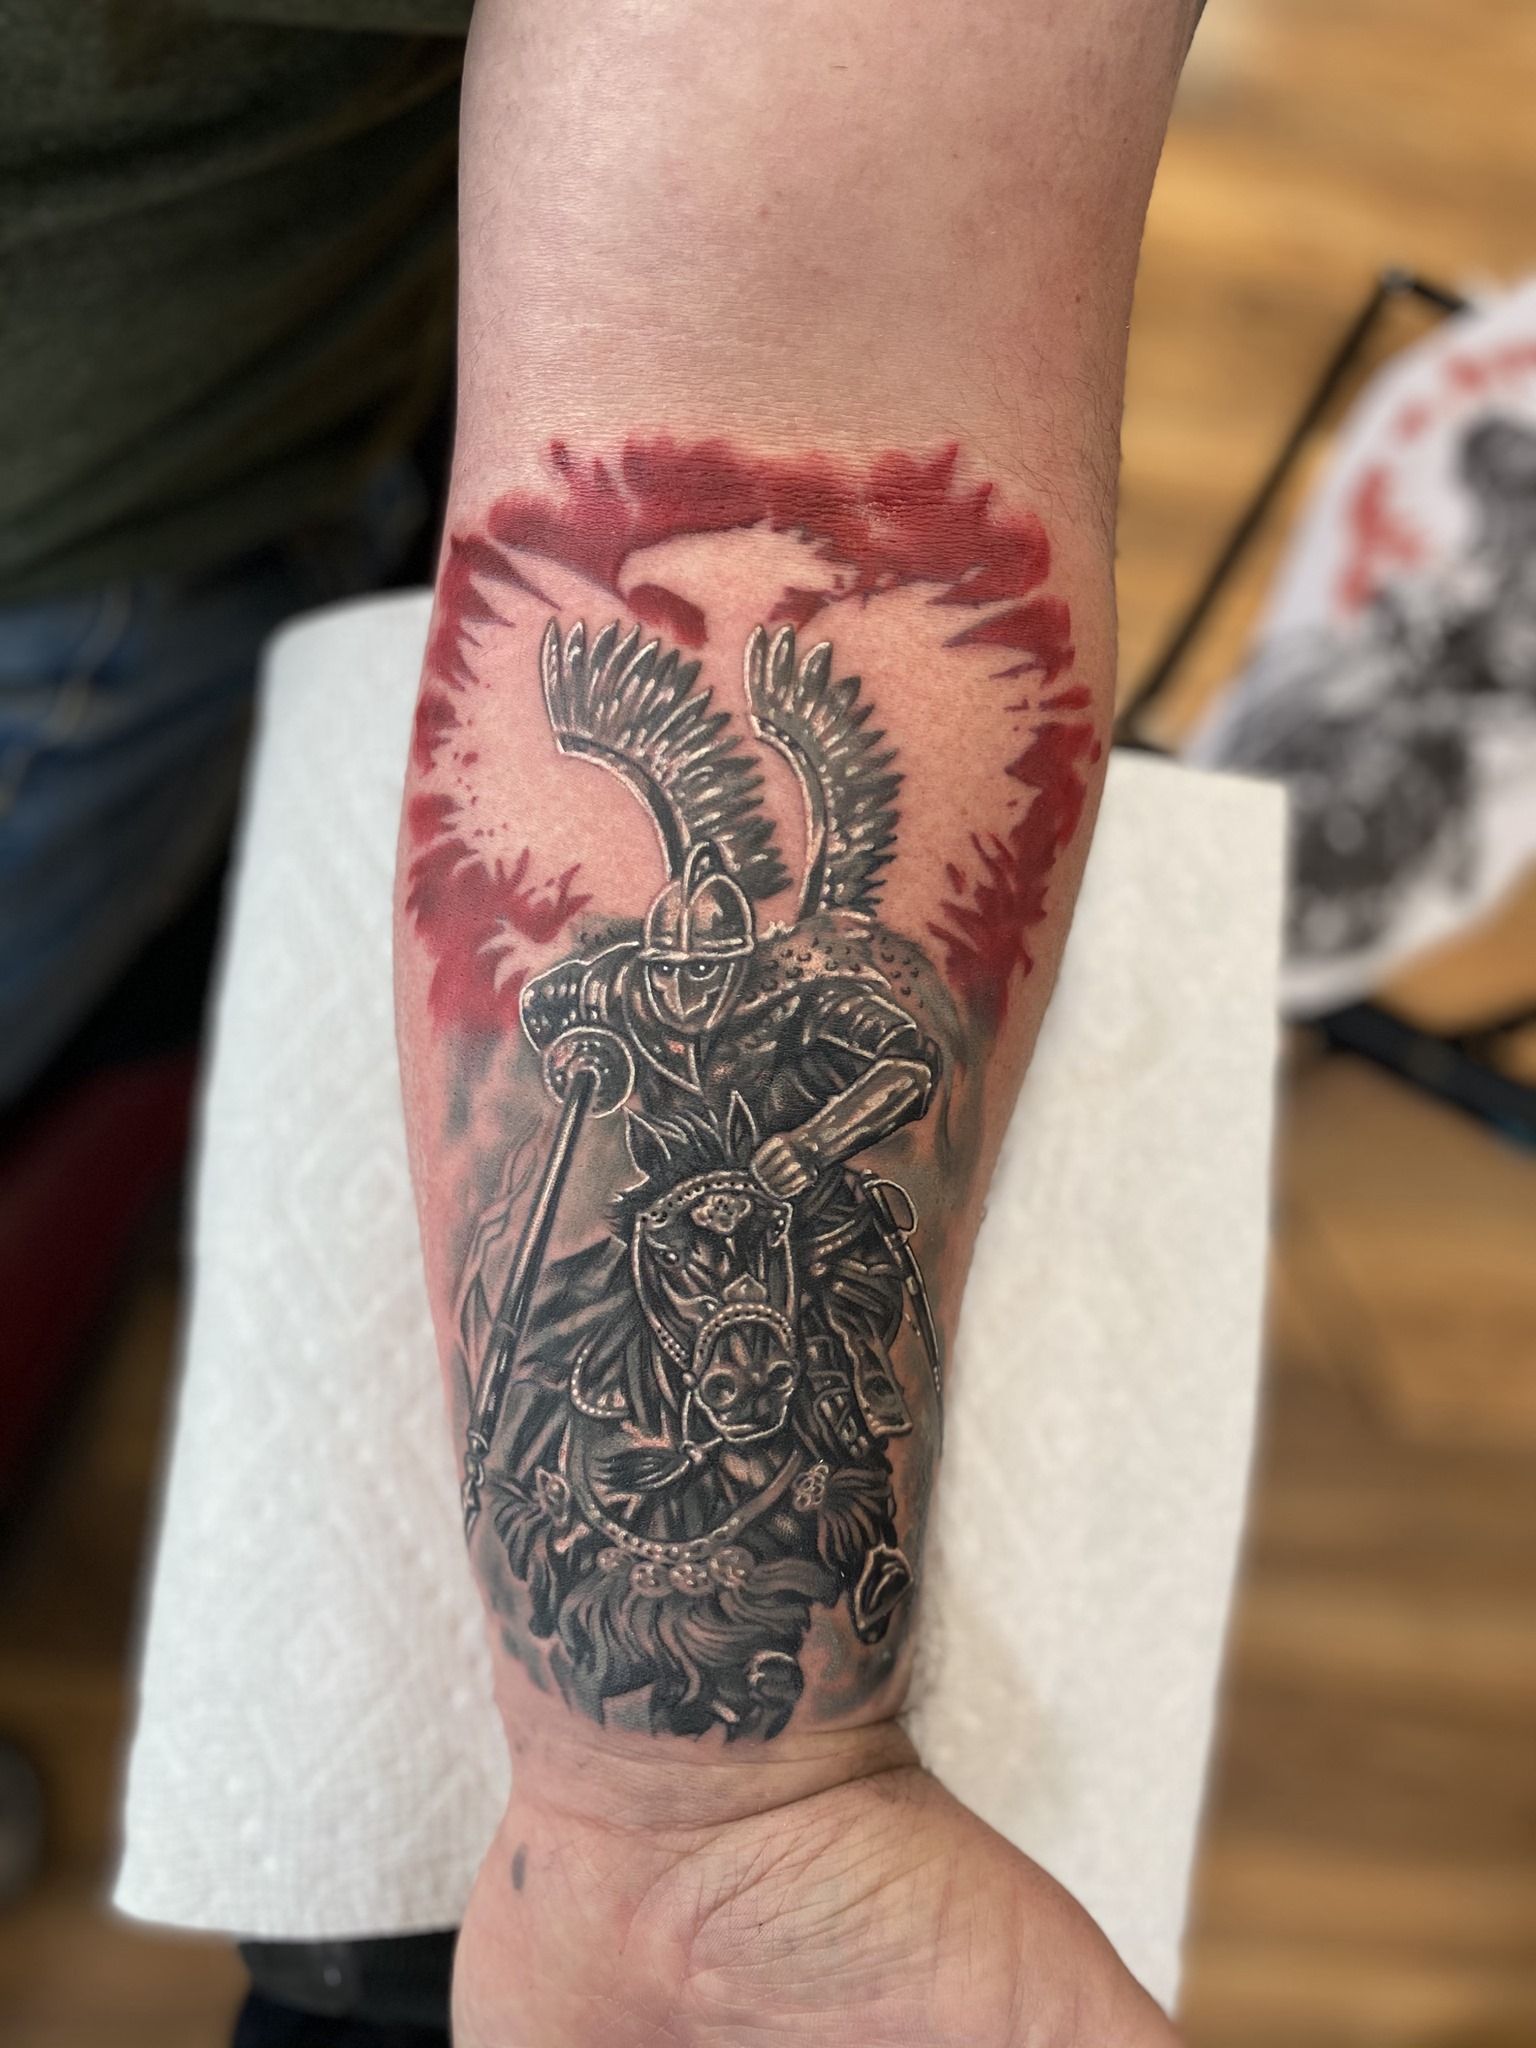 Polish Winged Hussar by Justin Uncle Trashcan at Built For Speed Tattoo  Orlando Fl  Tattoos Polish tattoos Polish hussars